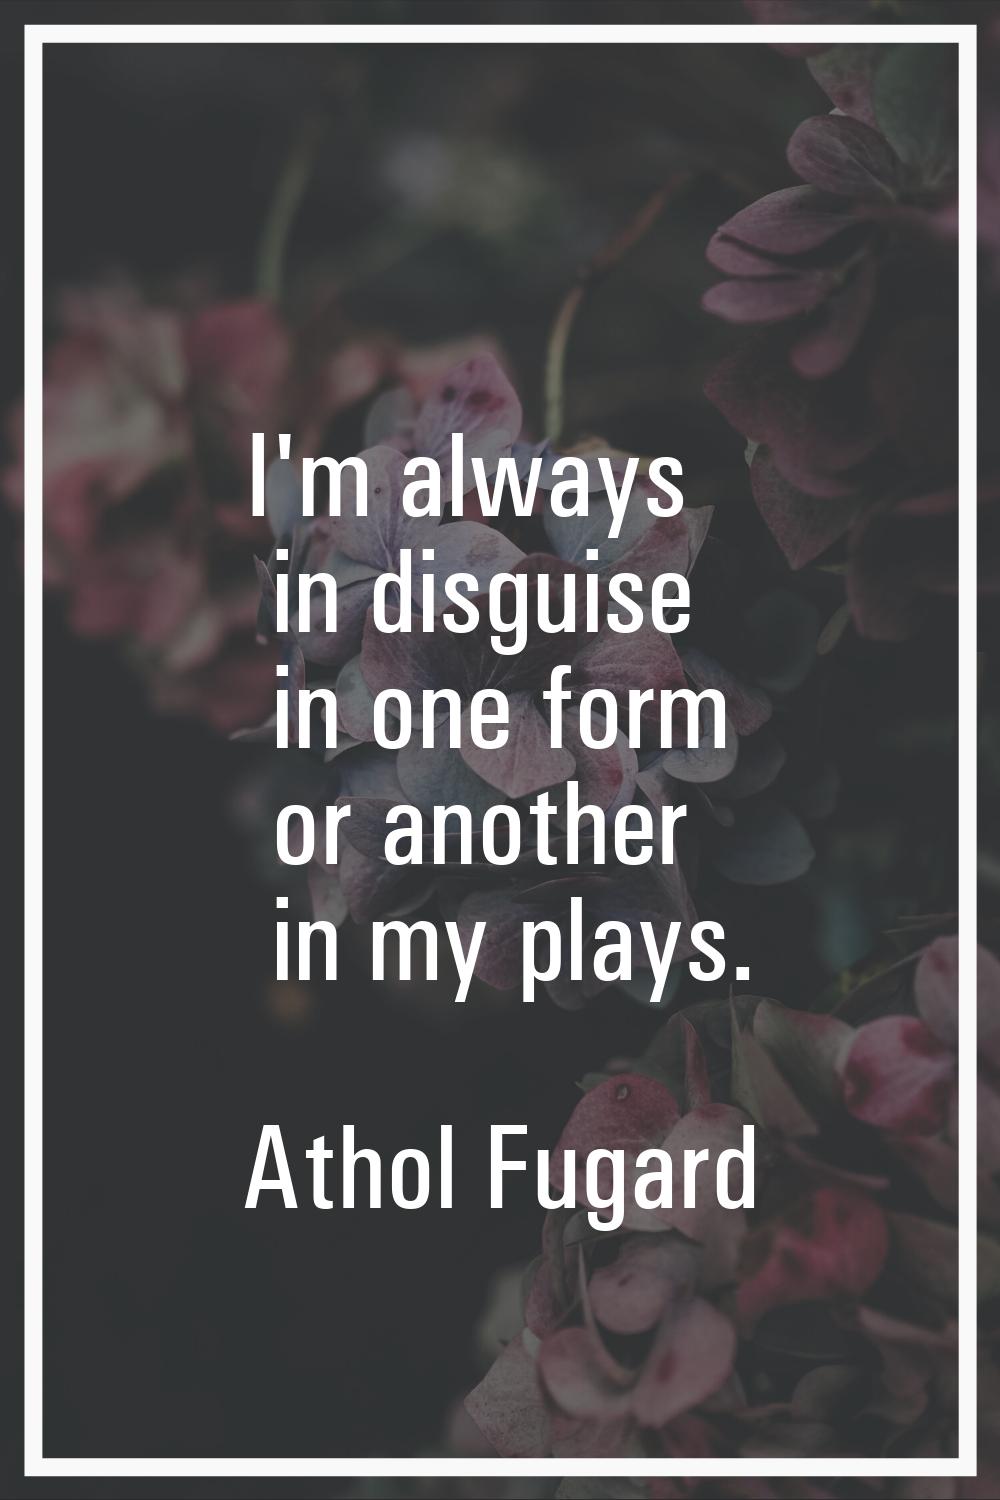 I'm always in disguise in one form or another in my plays.